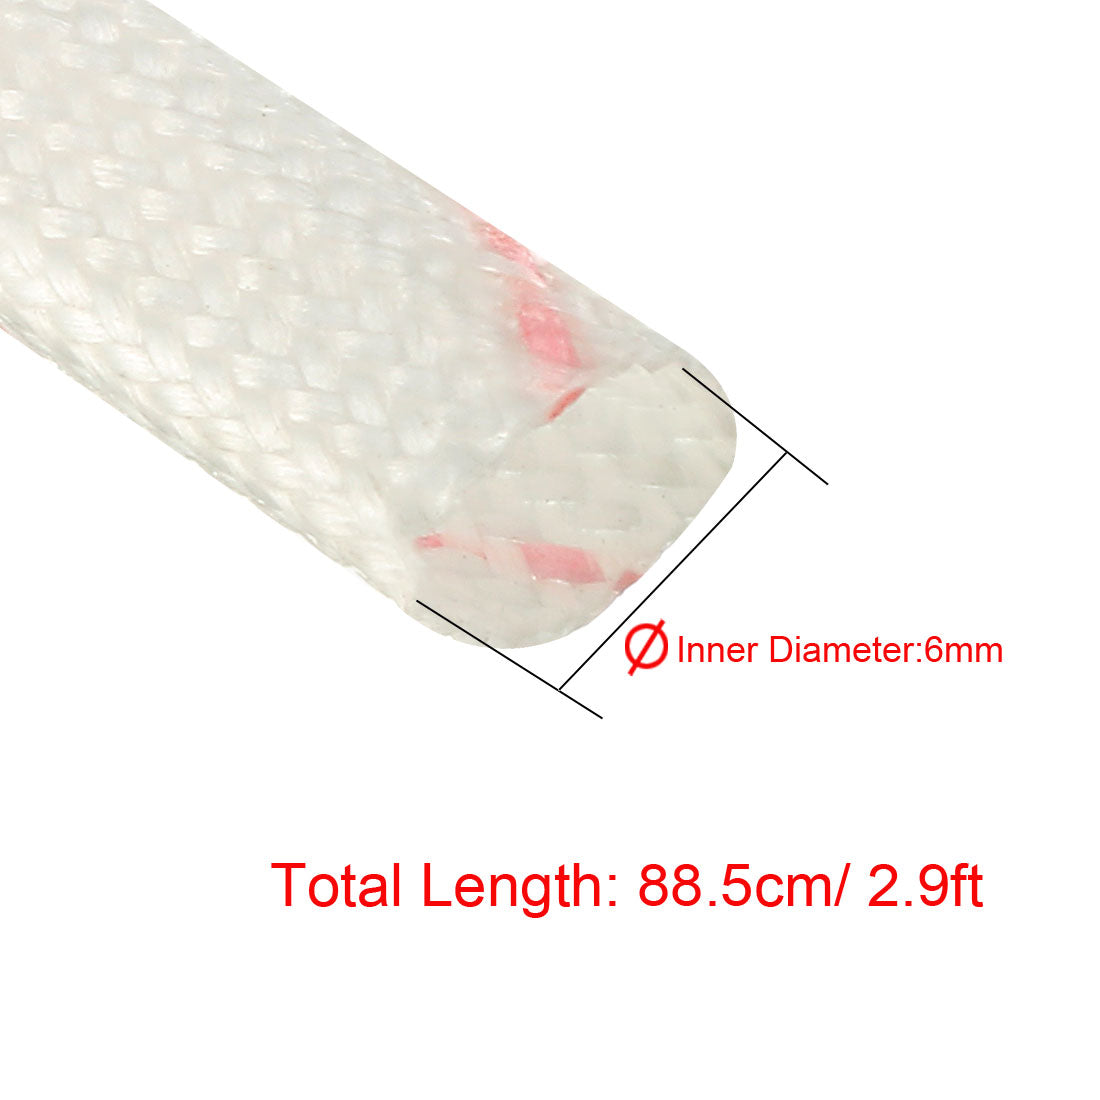 uxcell Uxcell Fiberglass Sleeve 6mm I.D. PVC Insulation Tubing 1500V Tube Adjustable Sleeving Pipe 125 Degree Centigrade Cable Wrap Wire 885mm 2.9ft 10pcs